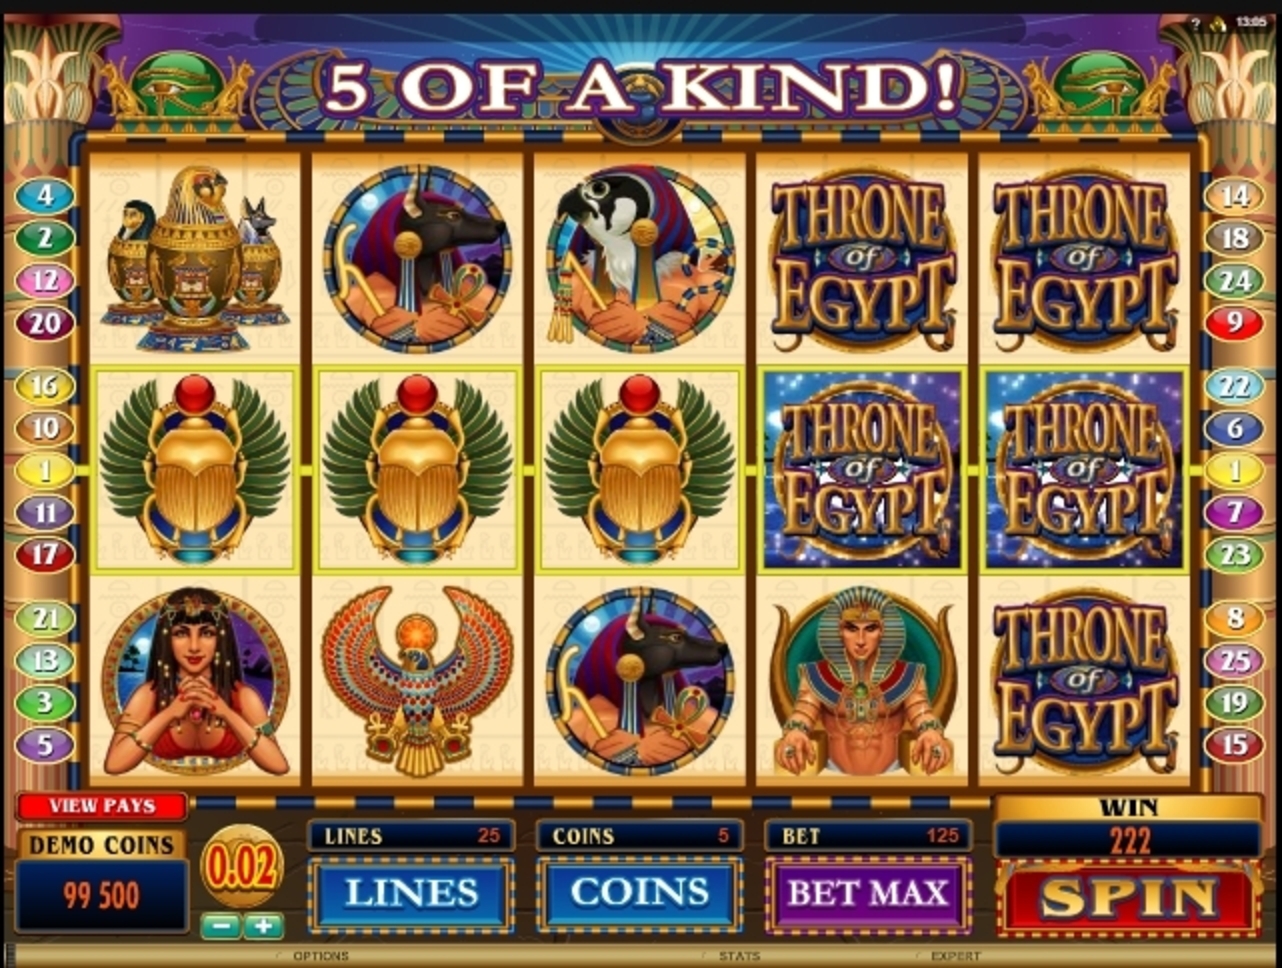 Win Money in Throne of Egypt Free Slot Game by Microgaming